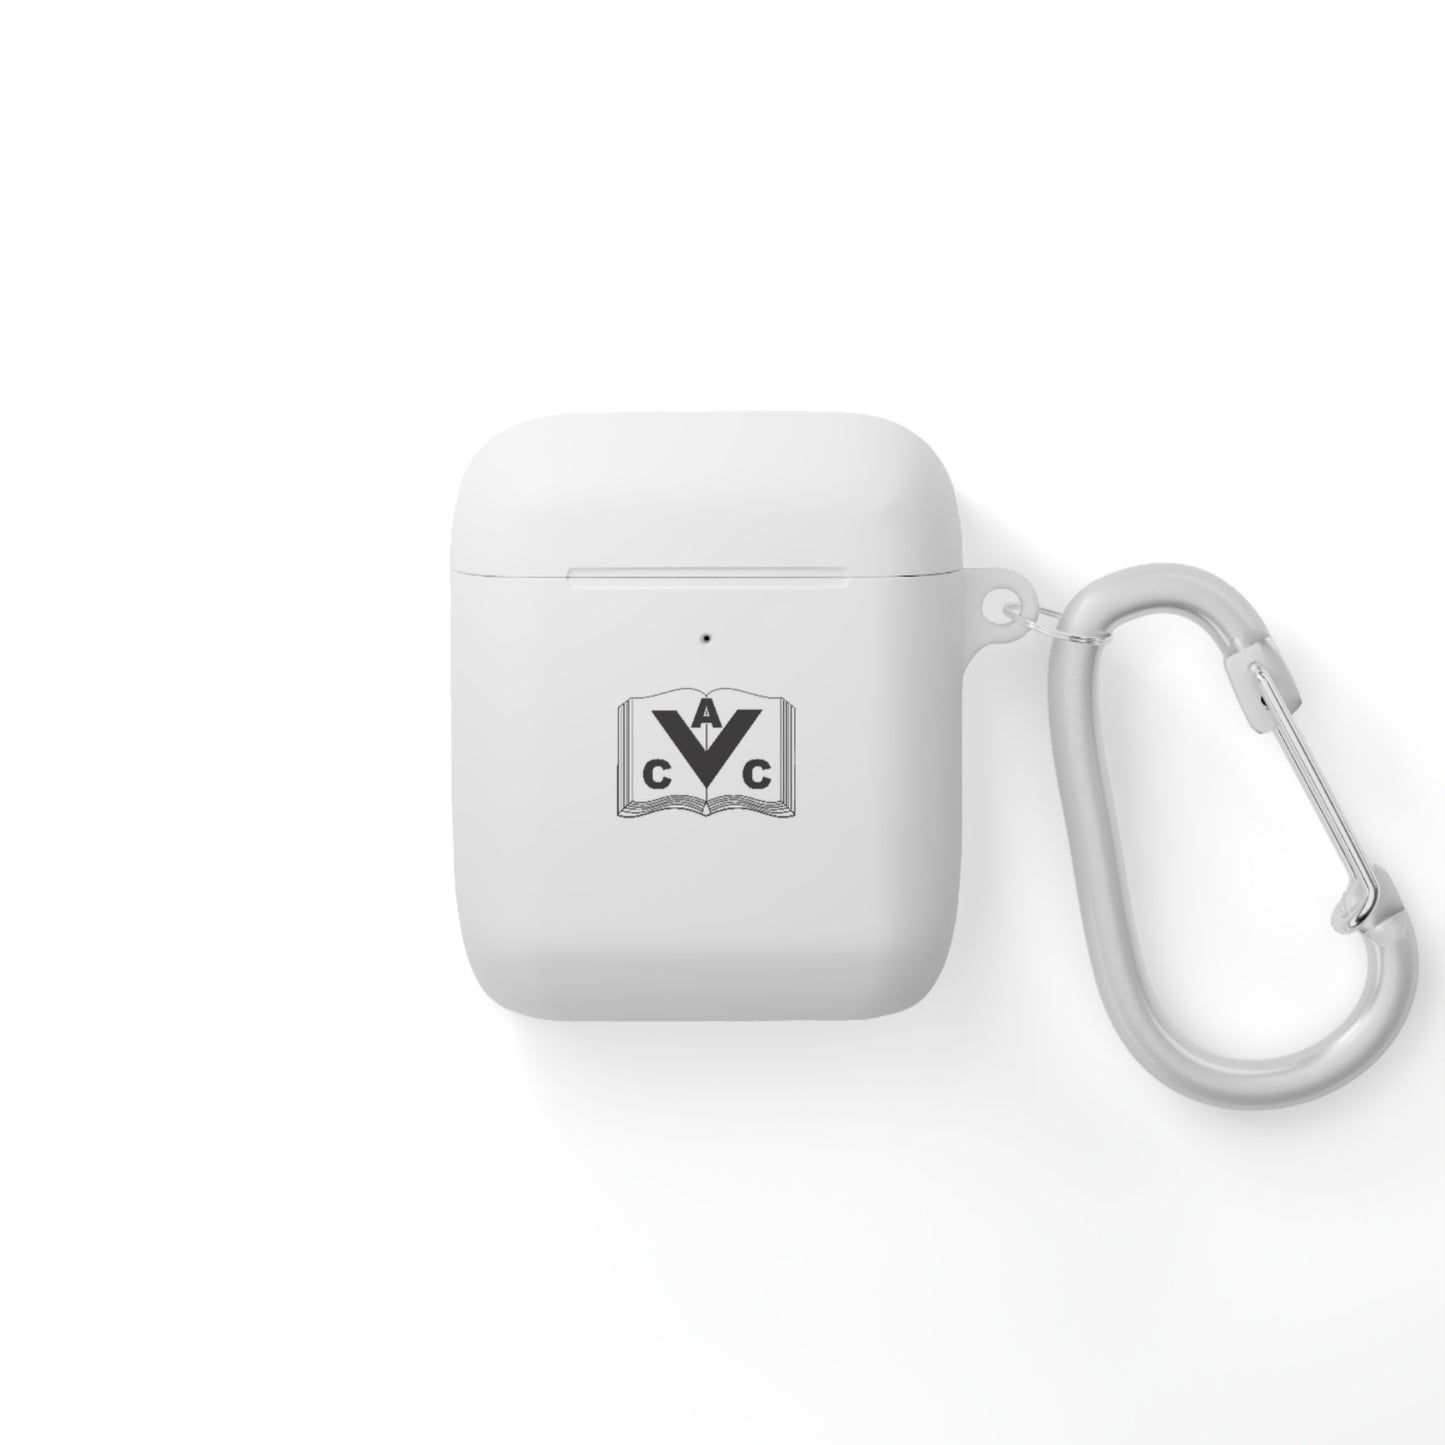 Club Atletico Colegiales AirPods and AirPods Pro Case Cover